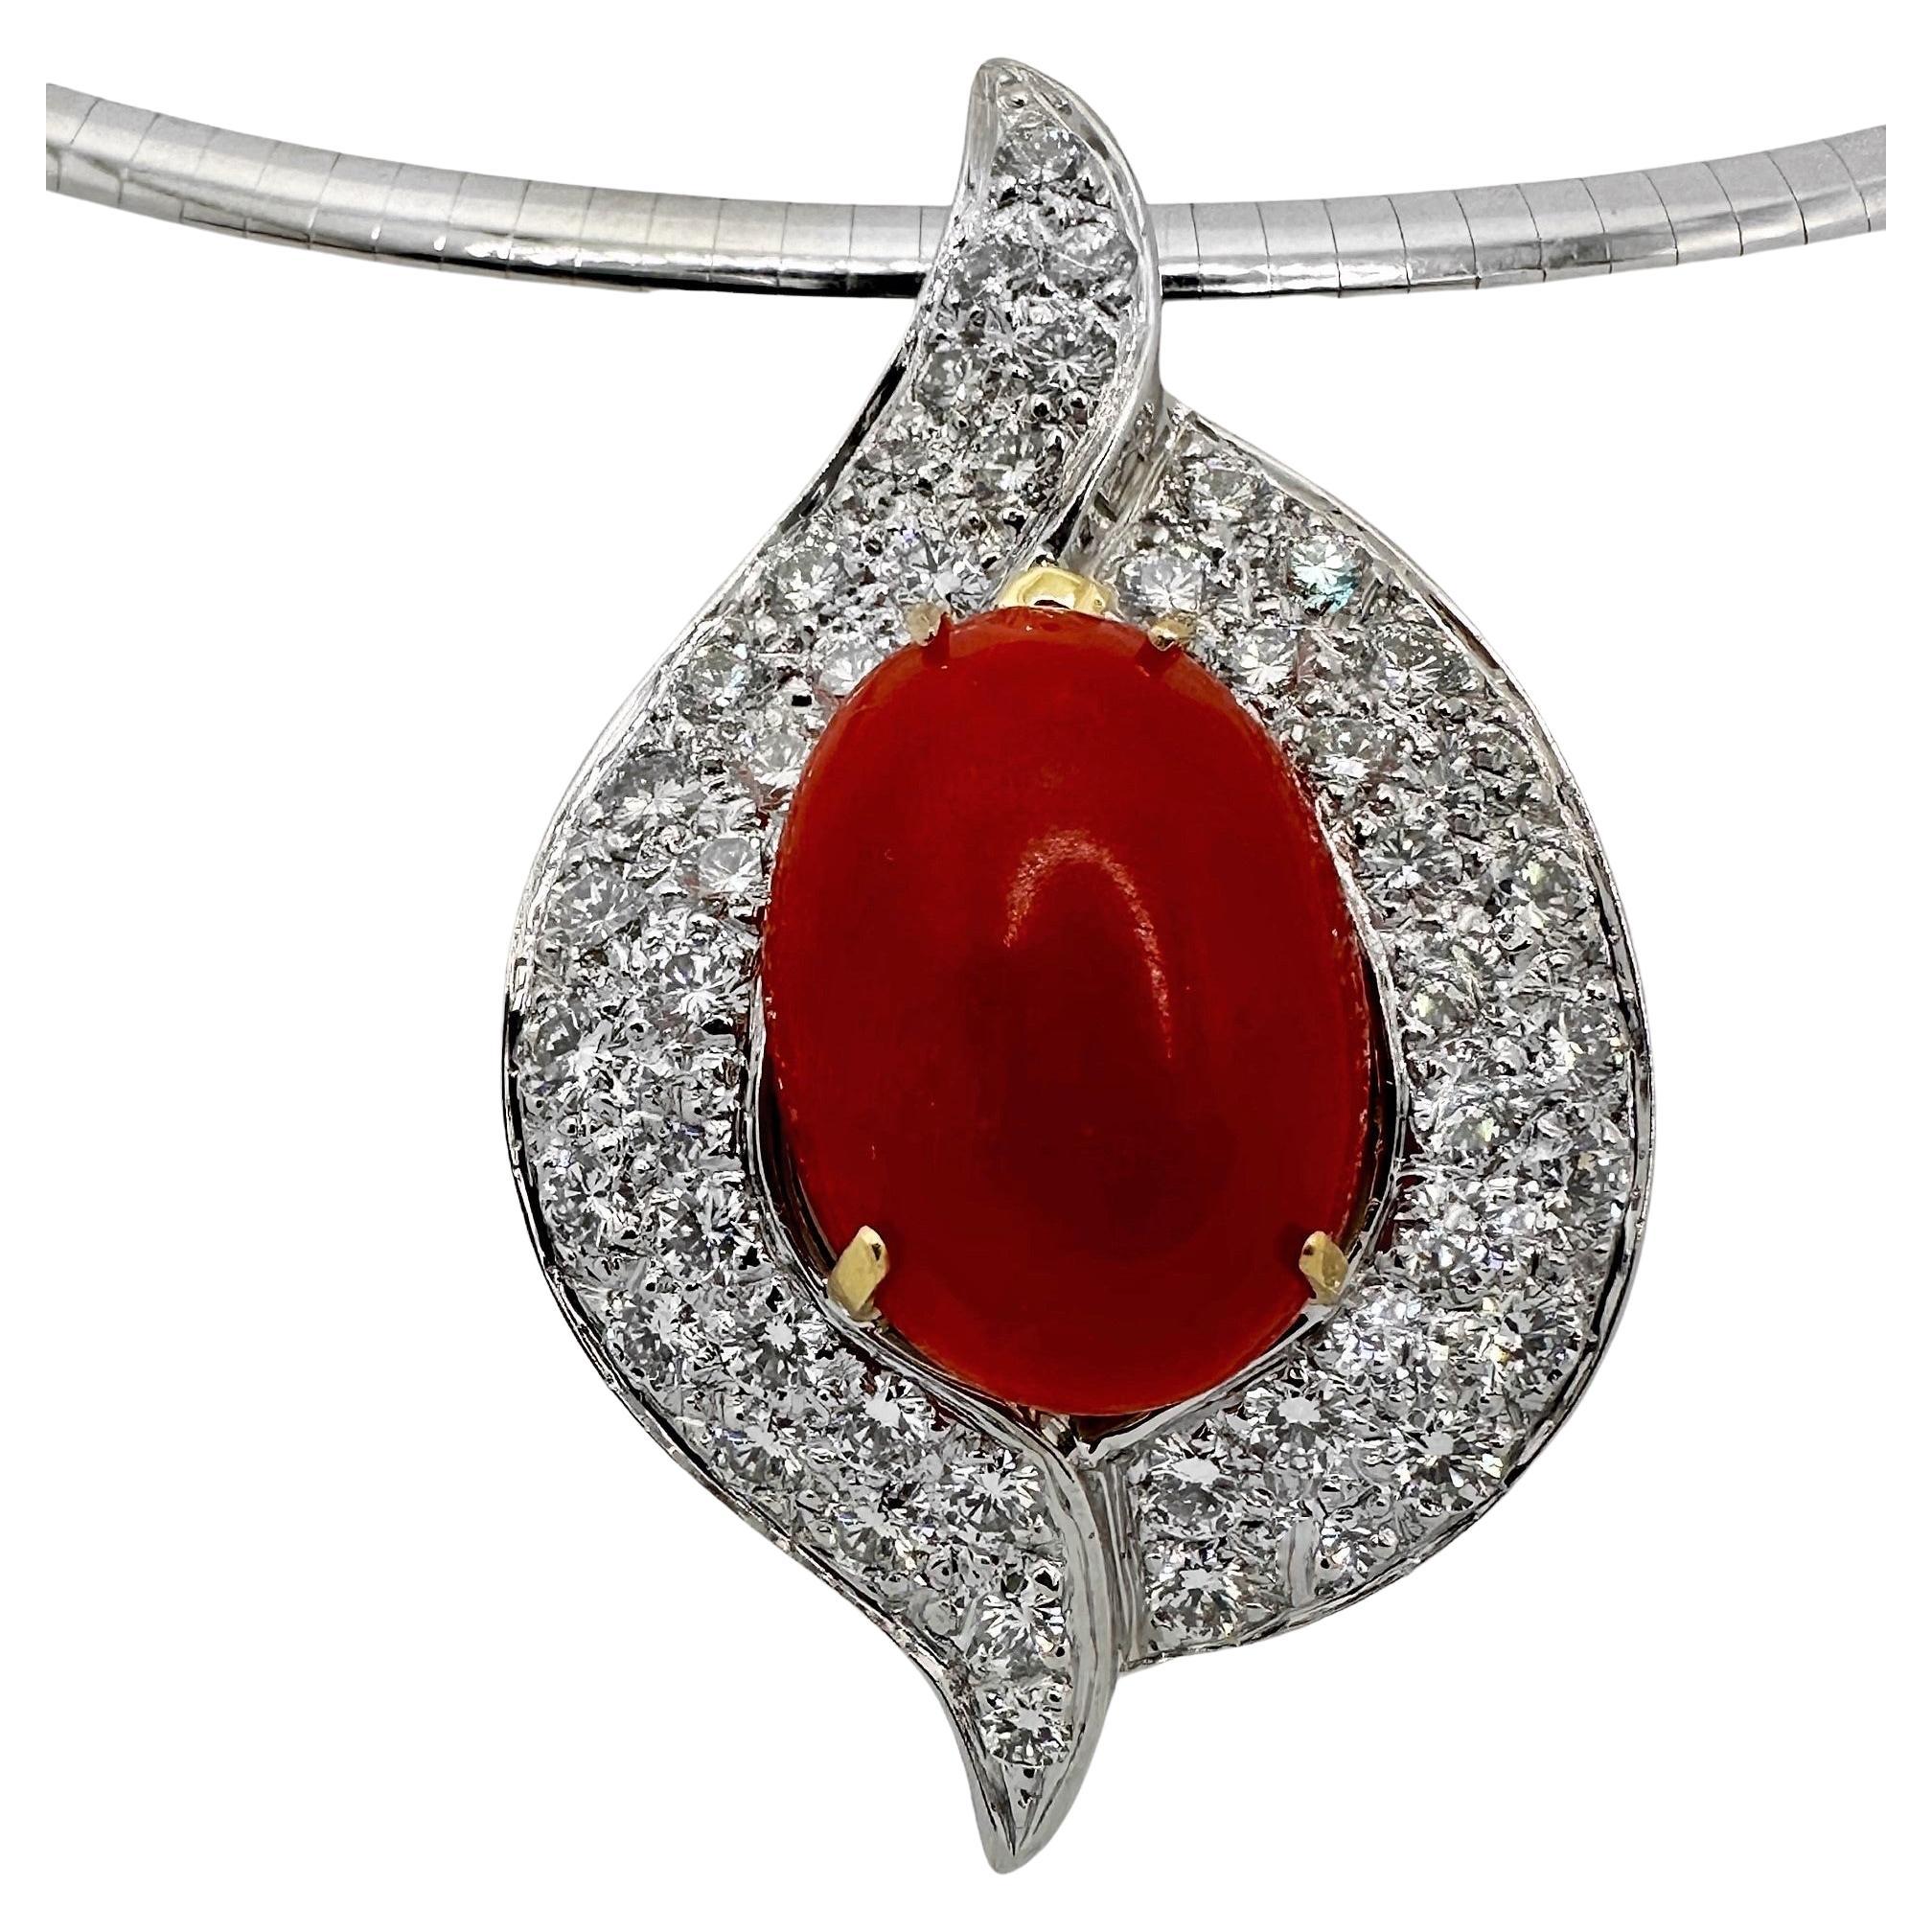 Dramatic 18k Coral & Diamond Pendant By Emis Beros Shown on an Omega Choker For Sale